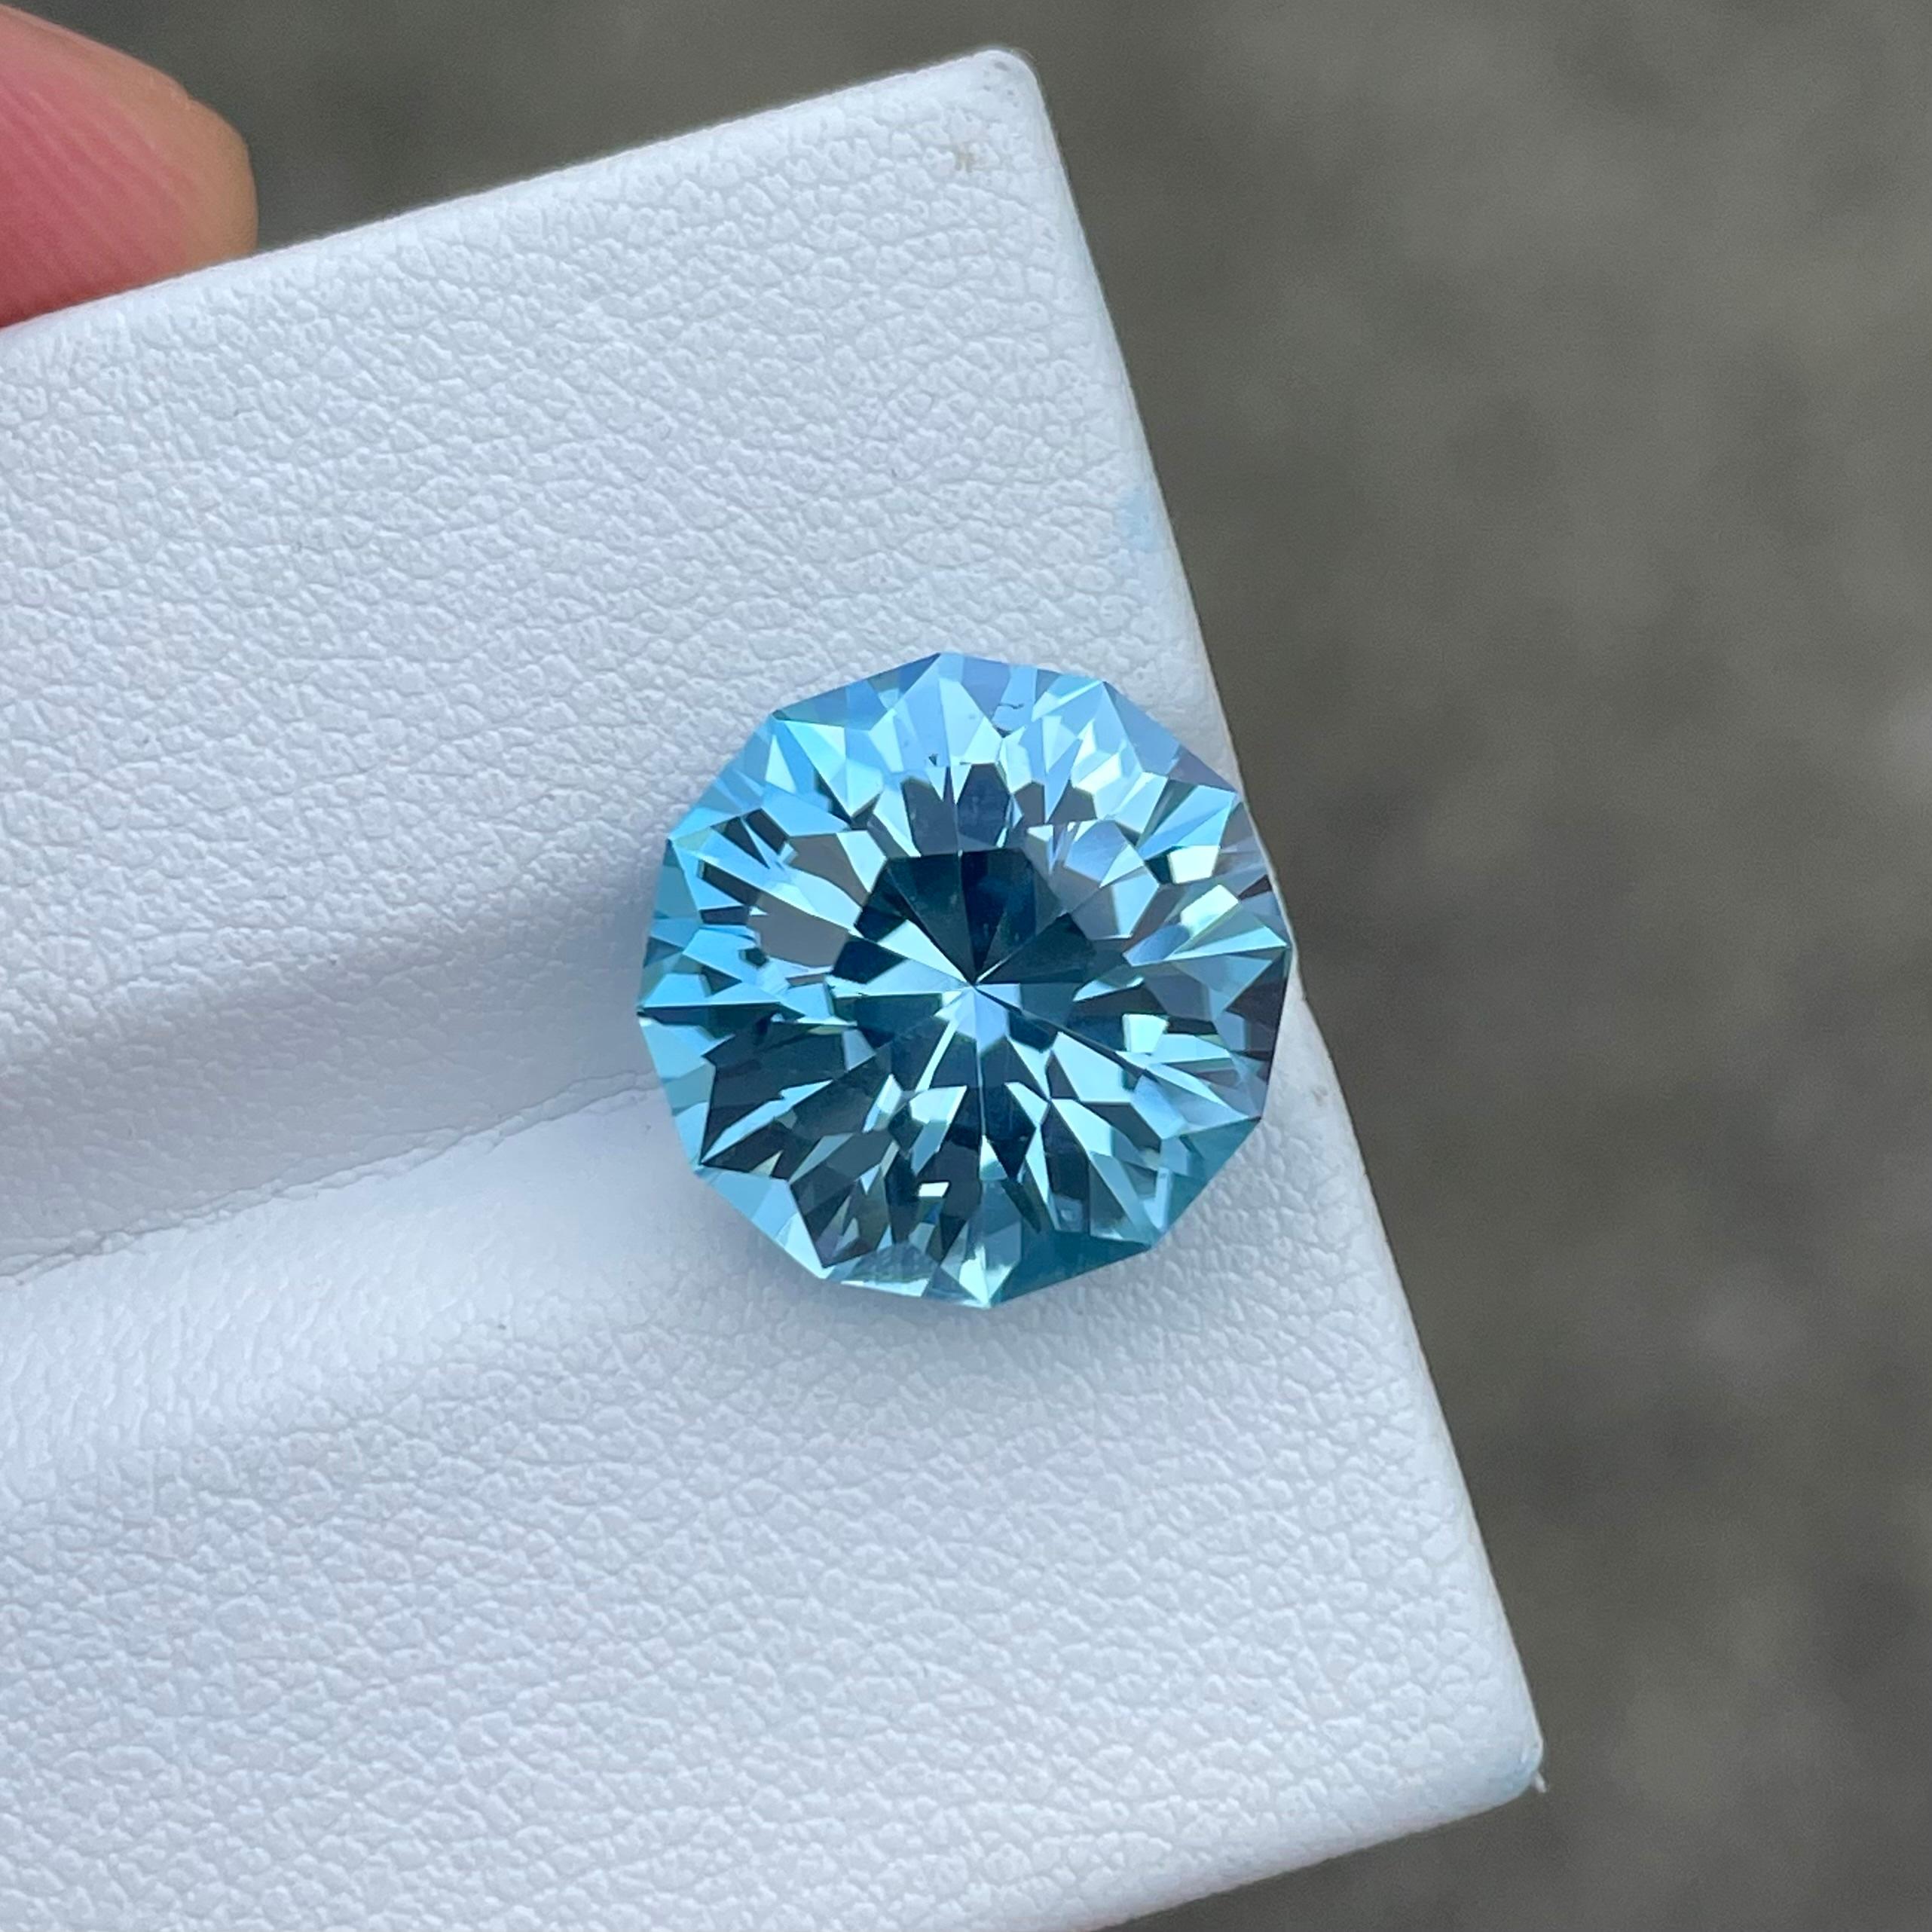 Modern Jewel-Toned Honey Comb Swiss Blue Topaz 12.10 carats Natural Gem from Madagascar For Sale